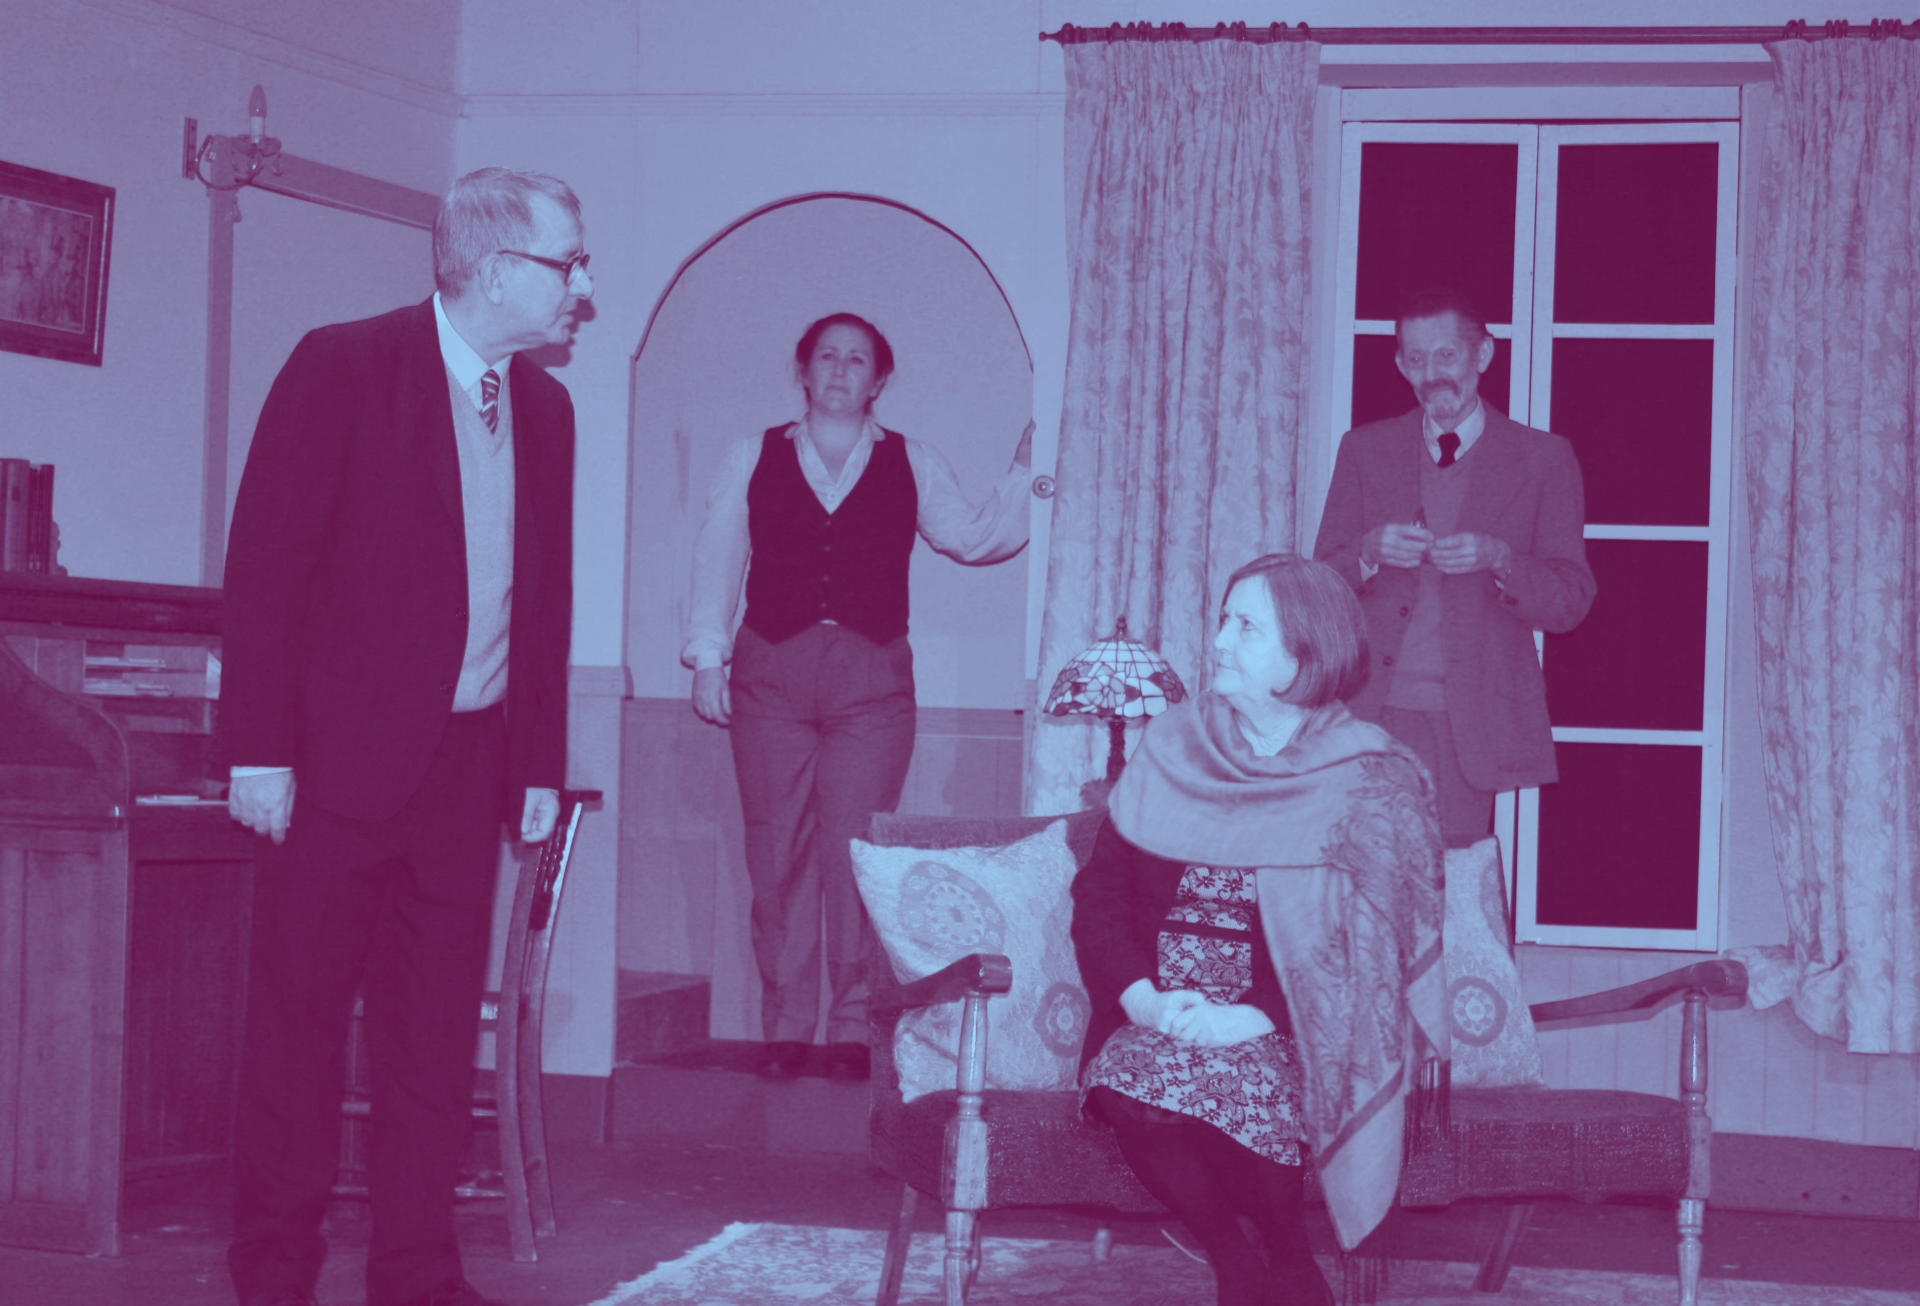 The Mousetrap - St Luke's Theatre Society